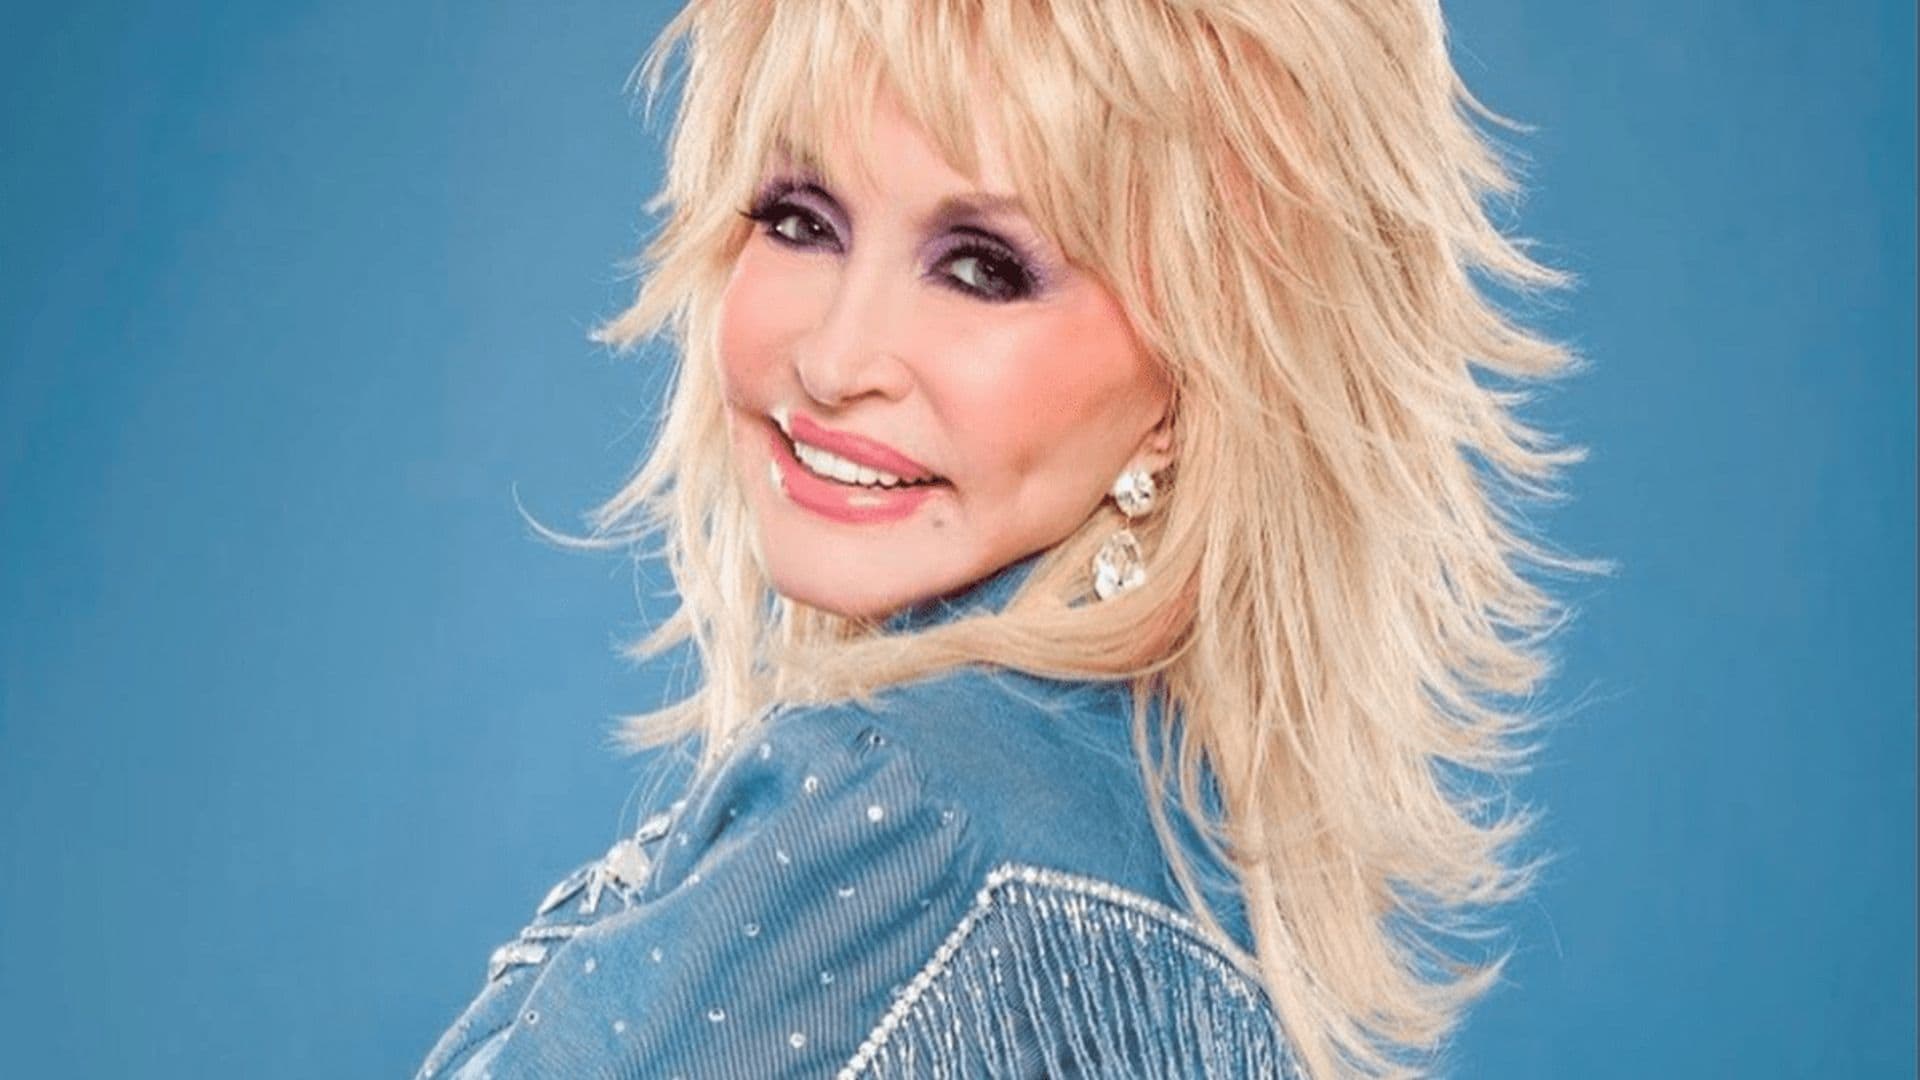 Dolly Parton receives COVID-19 vaccine in the most fashionable outfit